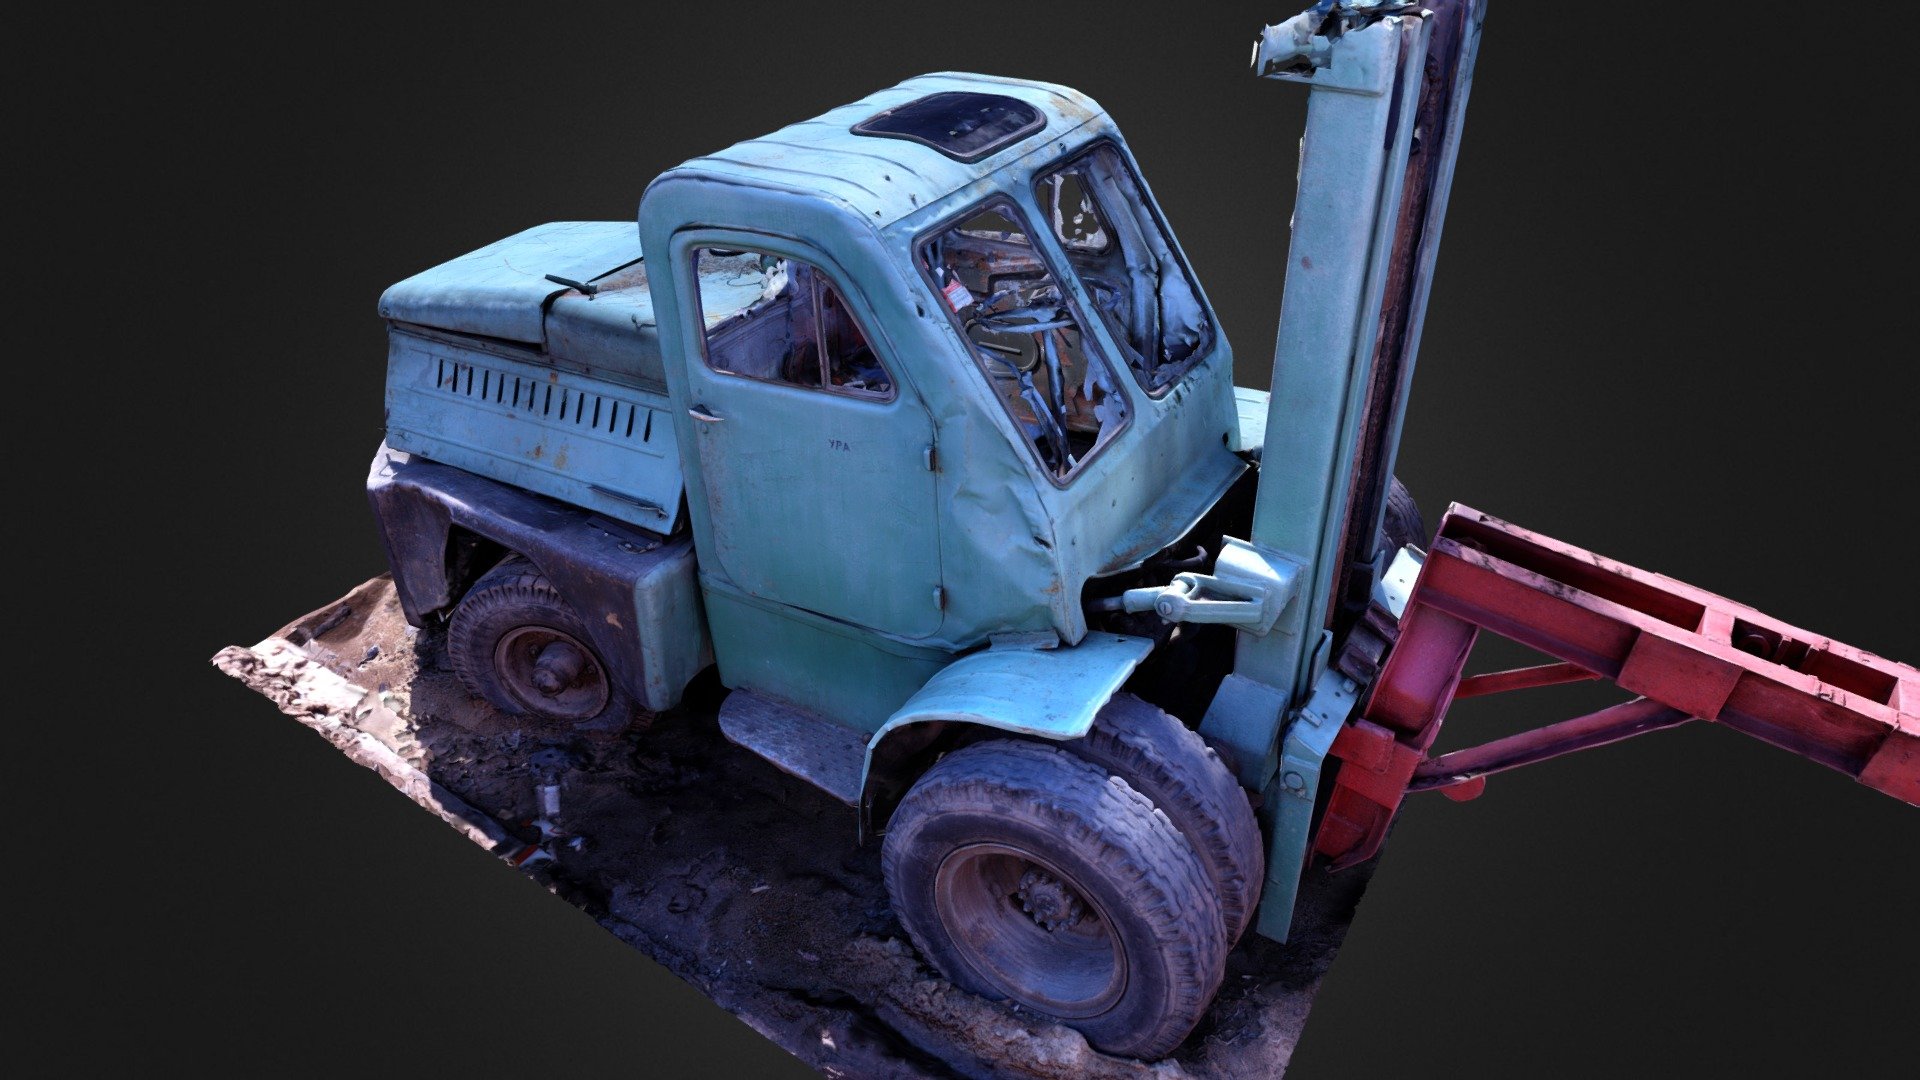 Lviv forklift AP-4045 was in production around 1960-1980.

Original model faces were around 77 millions, so it was decimated to 200K faces + original geometry baked in 16K normals map + 16K ambient occlusion map + 16K diffuse map (to fit in 200 megabytes limit).

Processed from 1569 photos: high quality depthmaps built in 4 hours, model from depthmaps built in 10 hours (i7-6700 CPU + 16 GB RAM + R9 390X GPU) 3d model